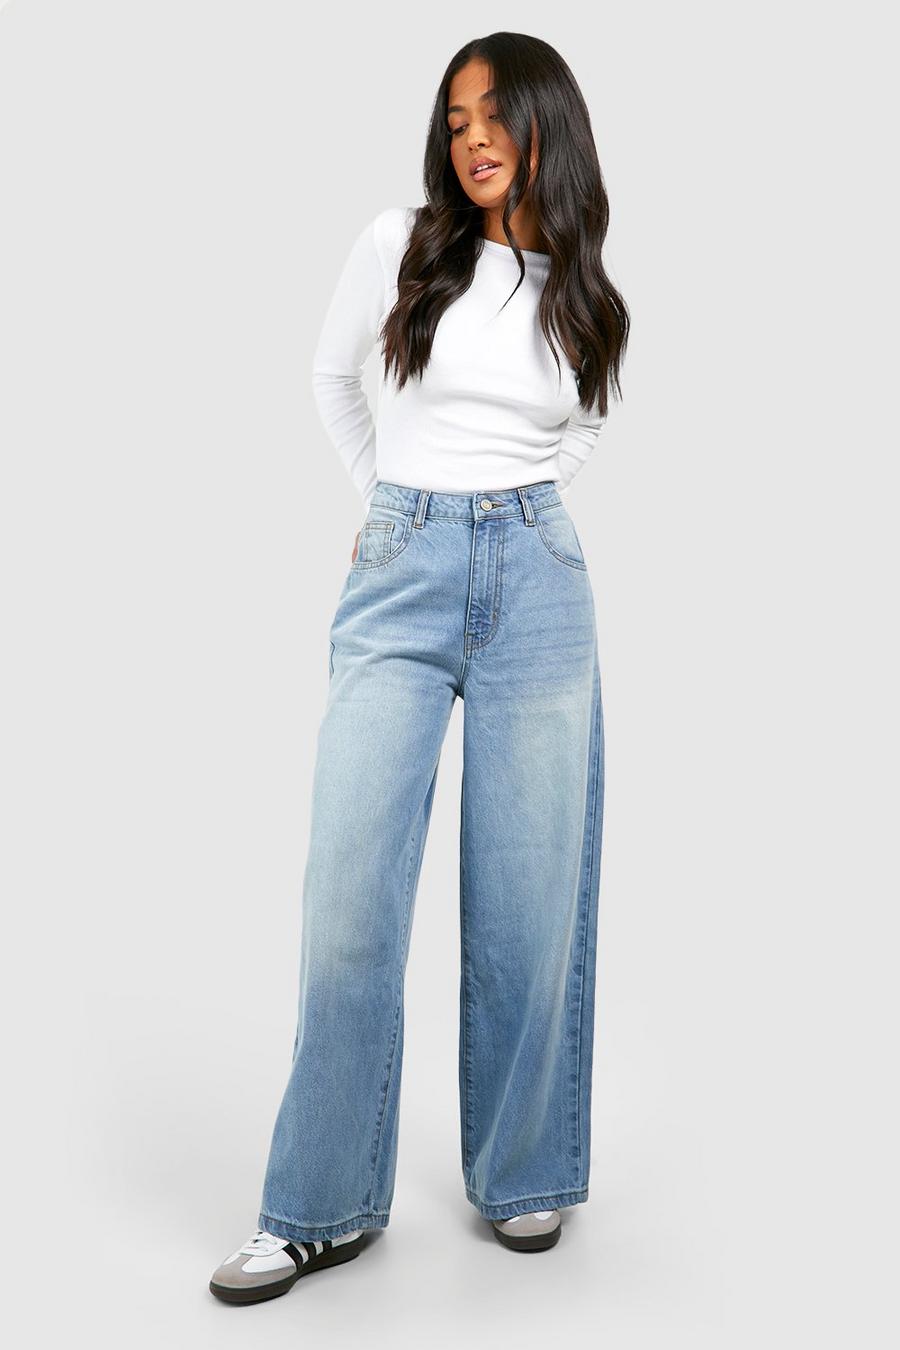 Washed blue The Petite Wide Leg 28 Inch Jean